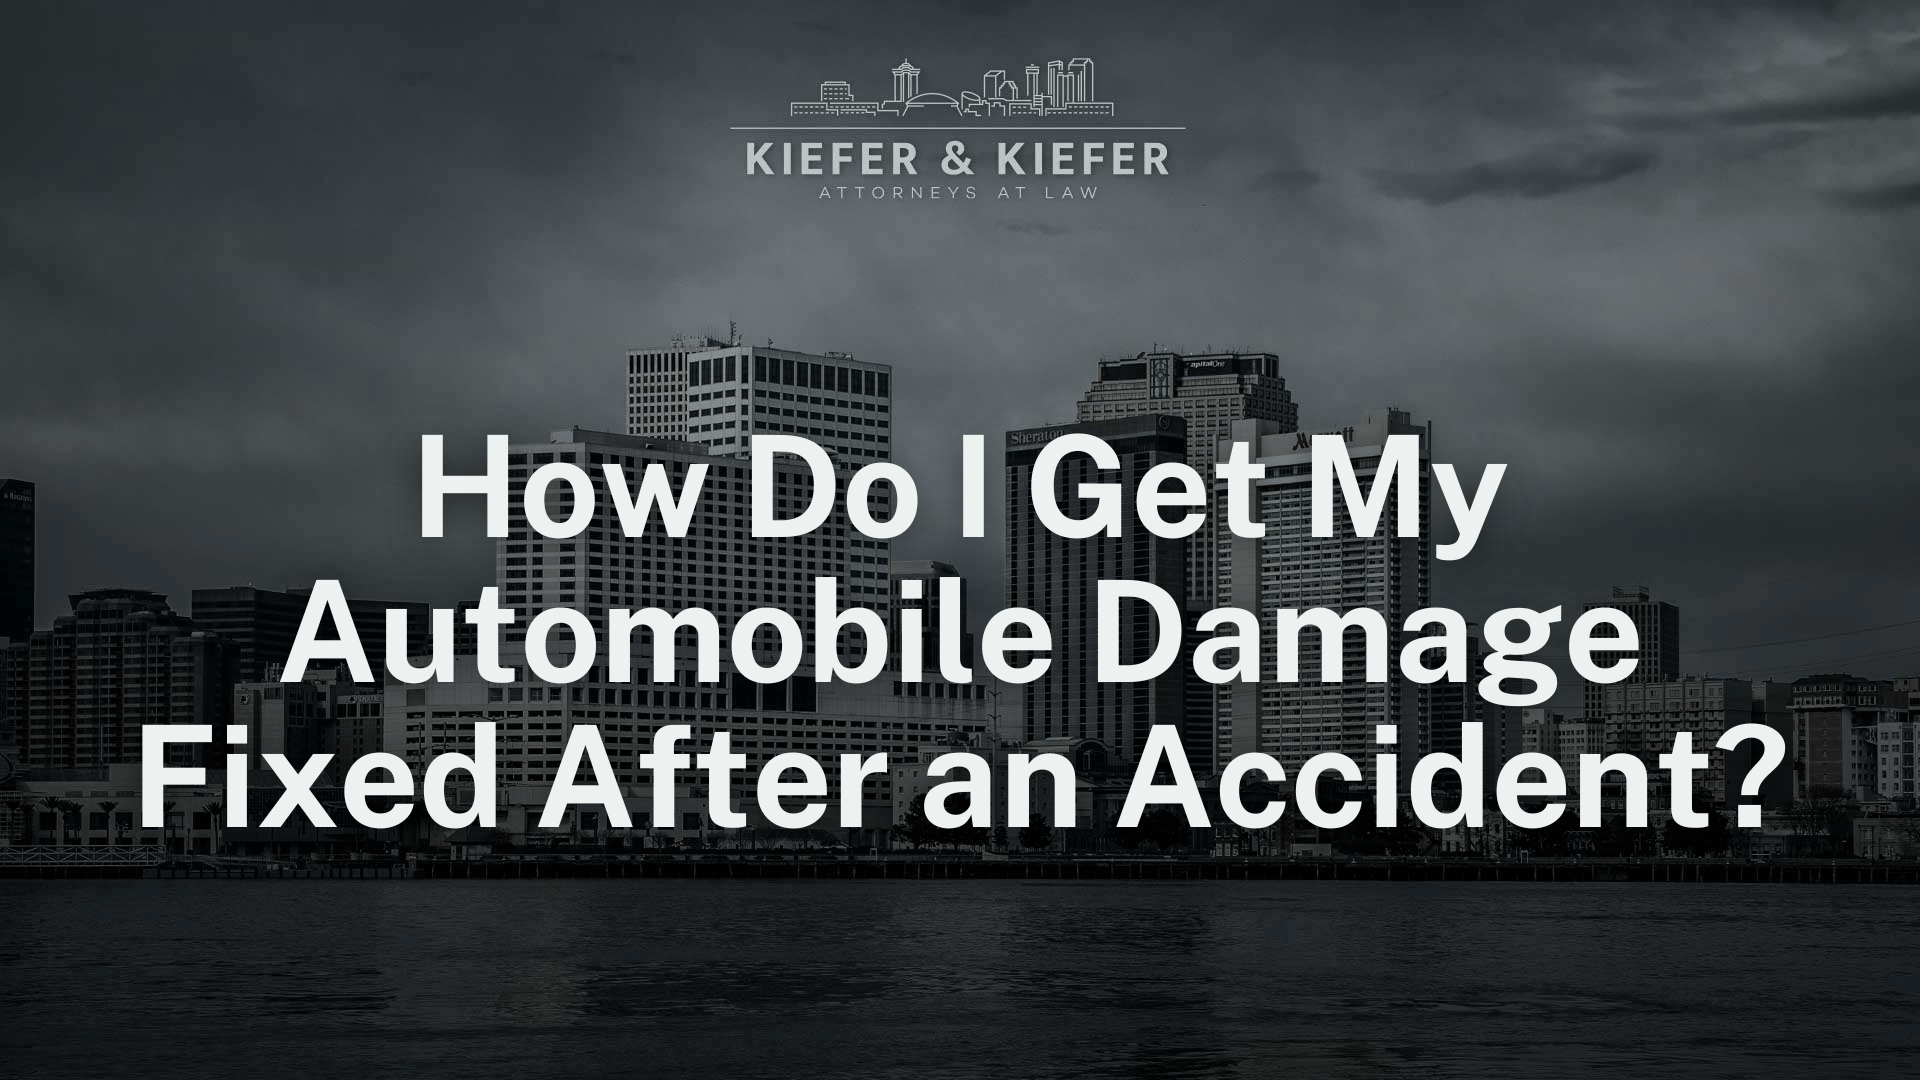 How Do I Get My Automobile Damage Fixed After an Accident - Kiefer & Kiefer New Orleans Personal Injury Attorneys